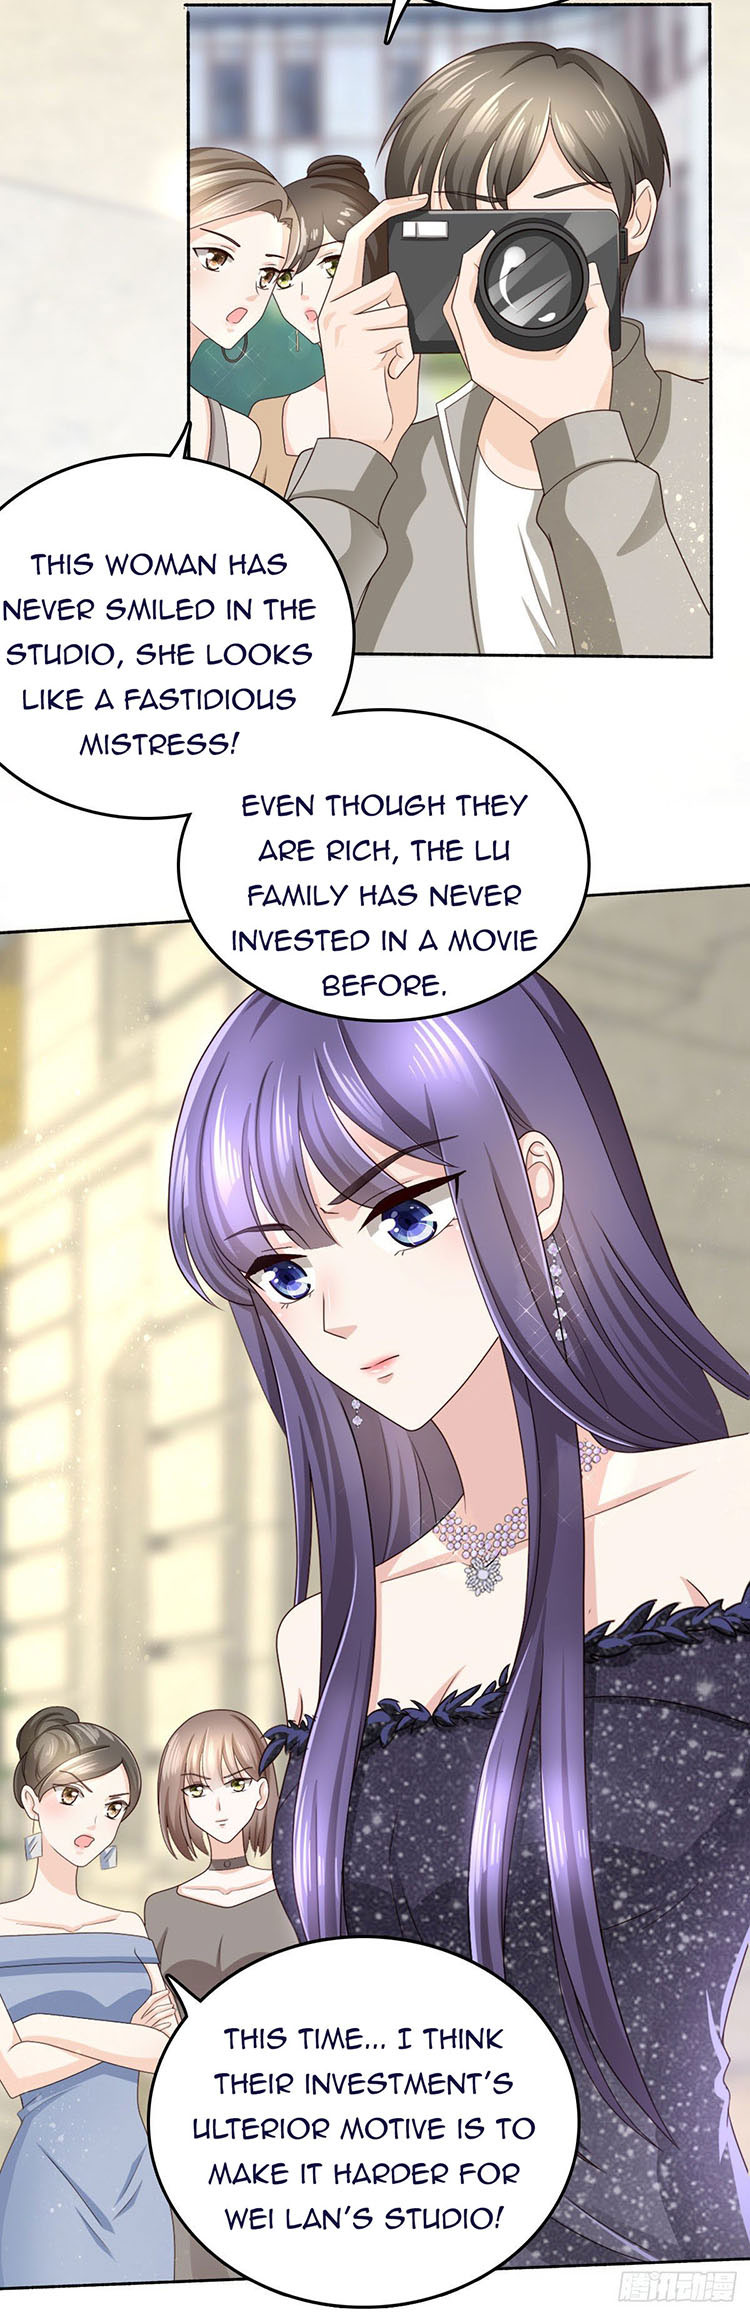 A Deadly Sexy Wife: The Ceo Wants To Remarry - Page 2